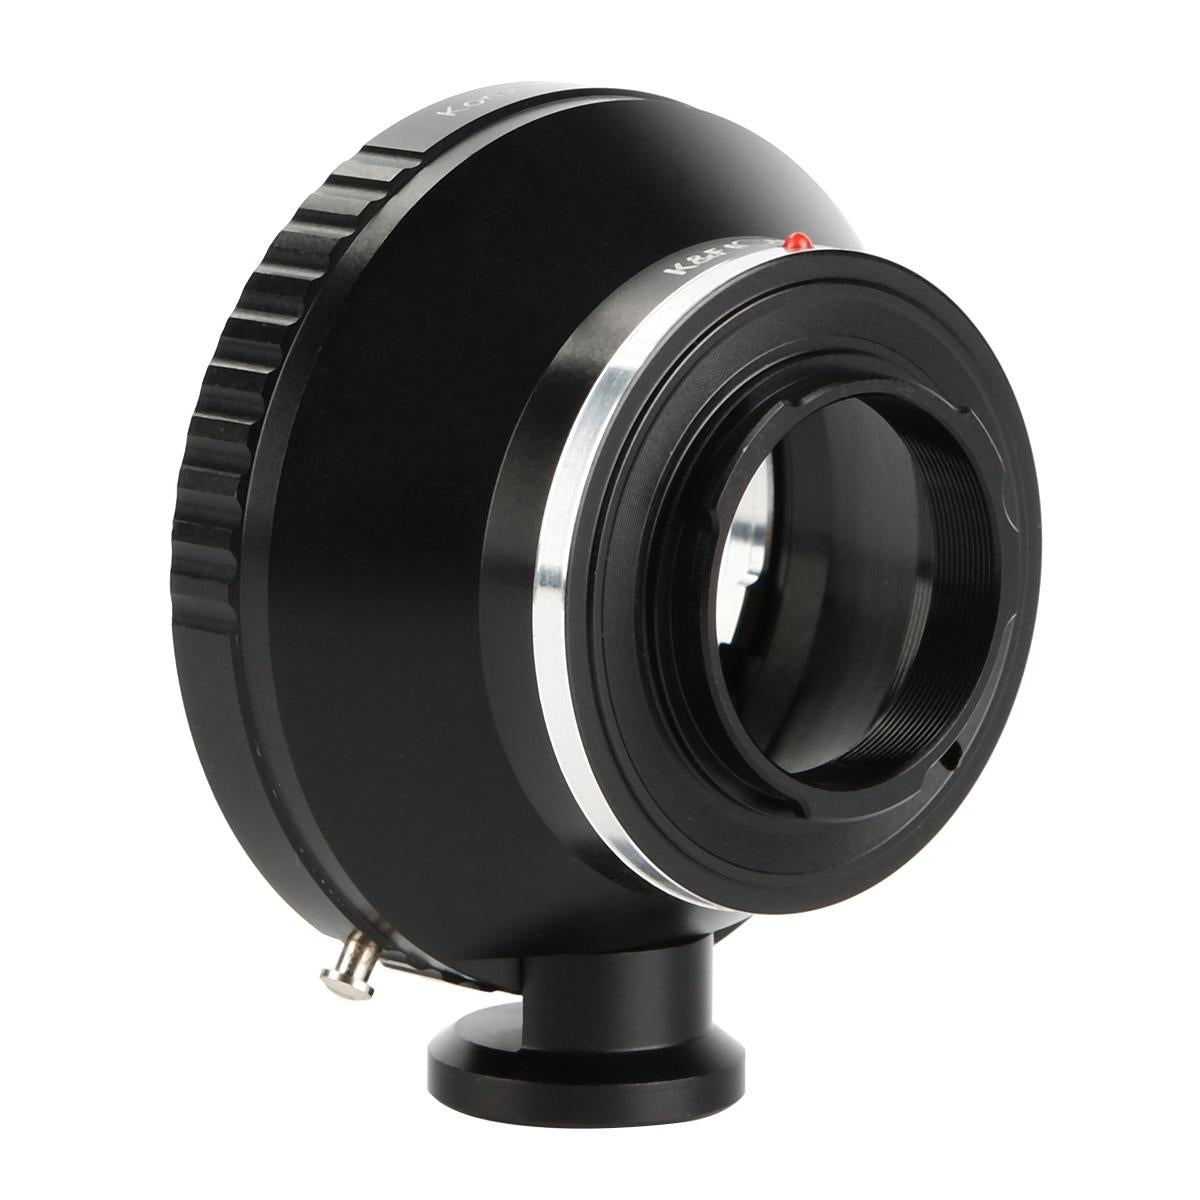 K&F Concept Konica AR Lenses to Pentax Q Camera Mount Adapter with Tripod Mount